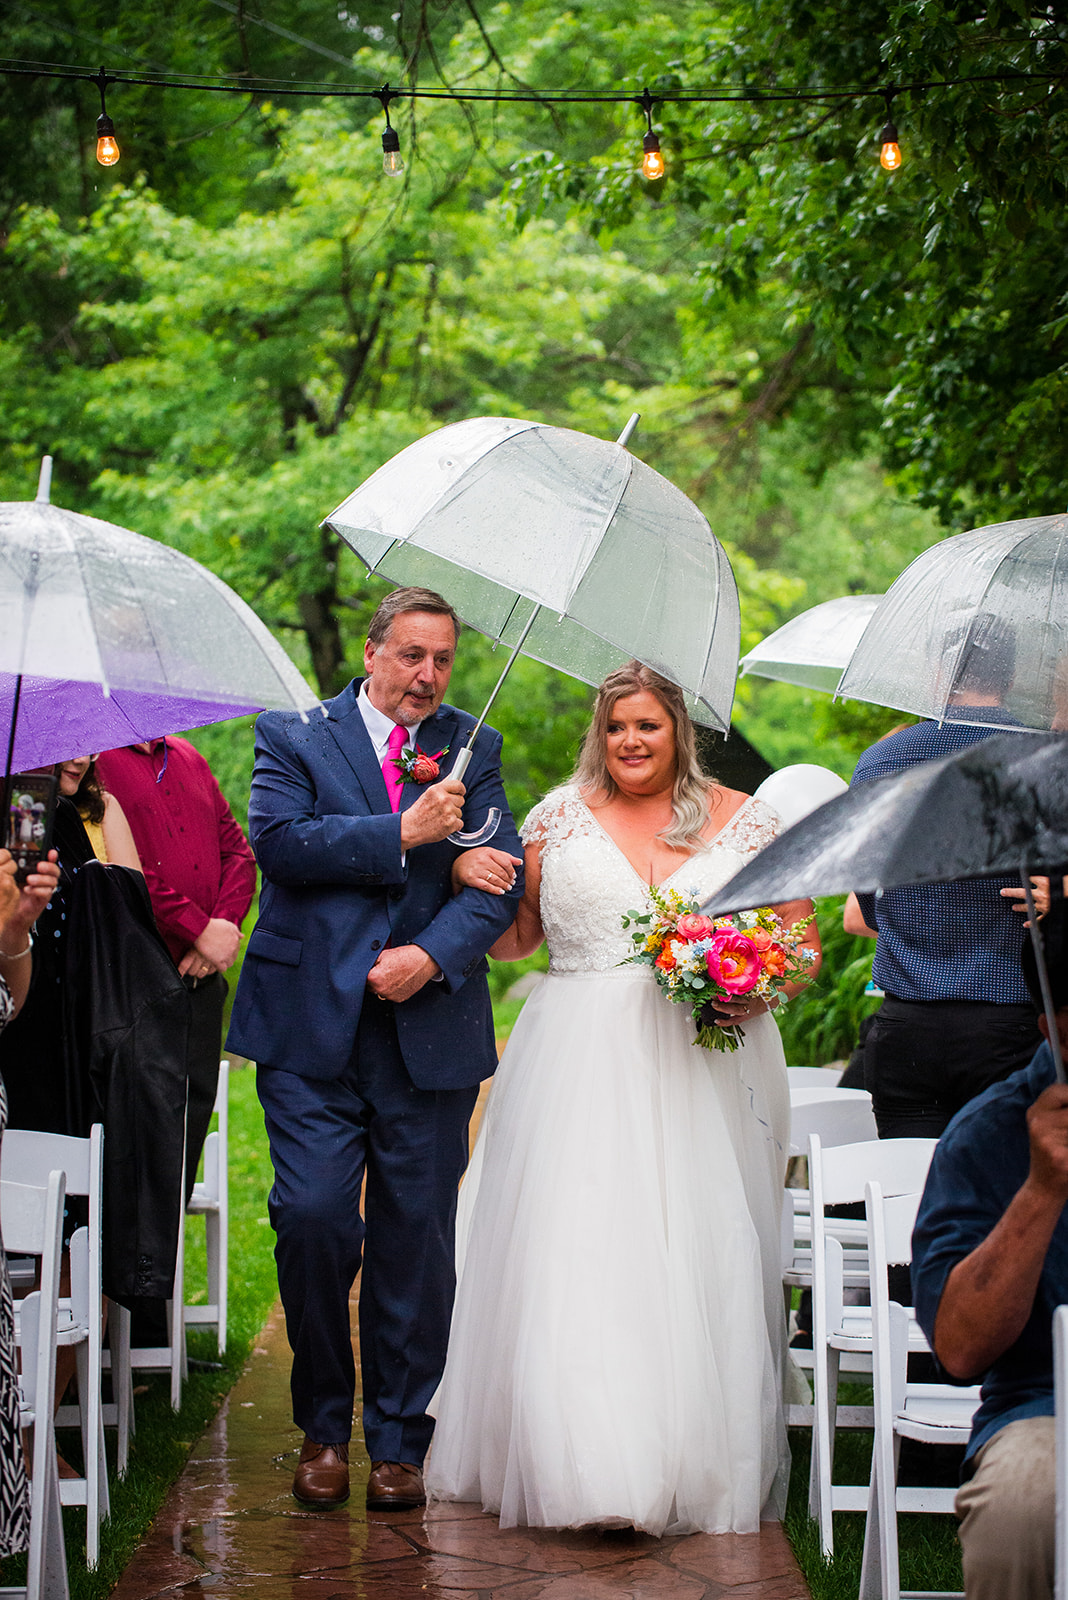 The bride's father walks her up the aisle in the rain, holding a clear umbrella.